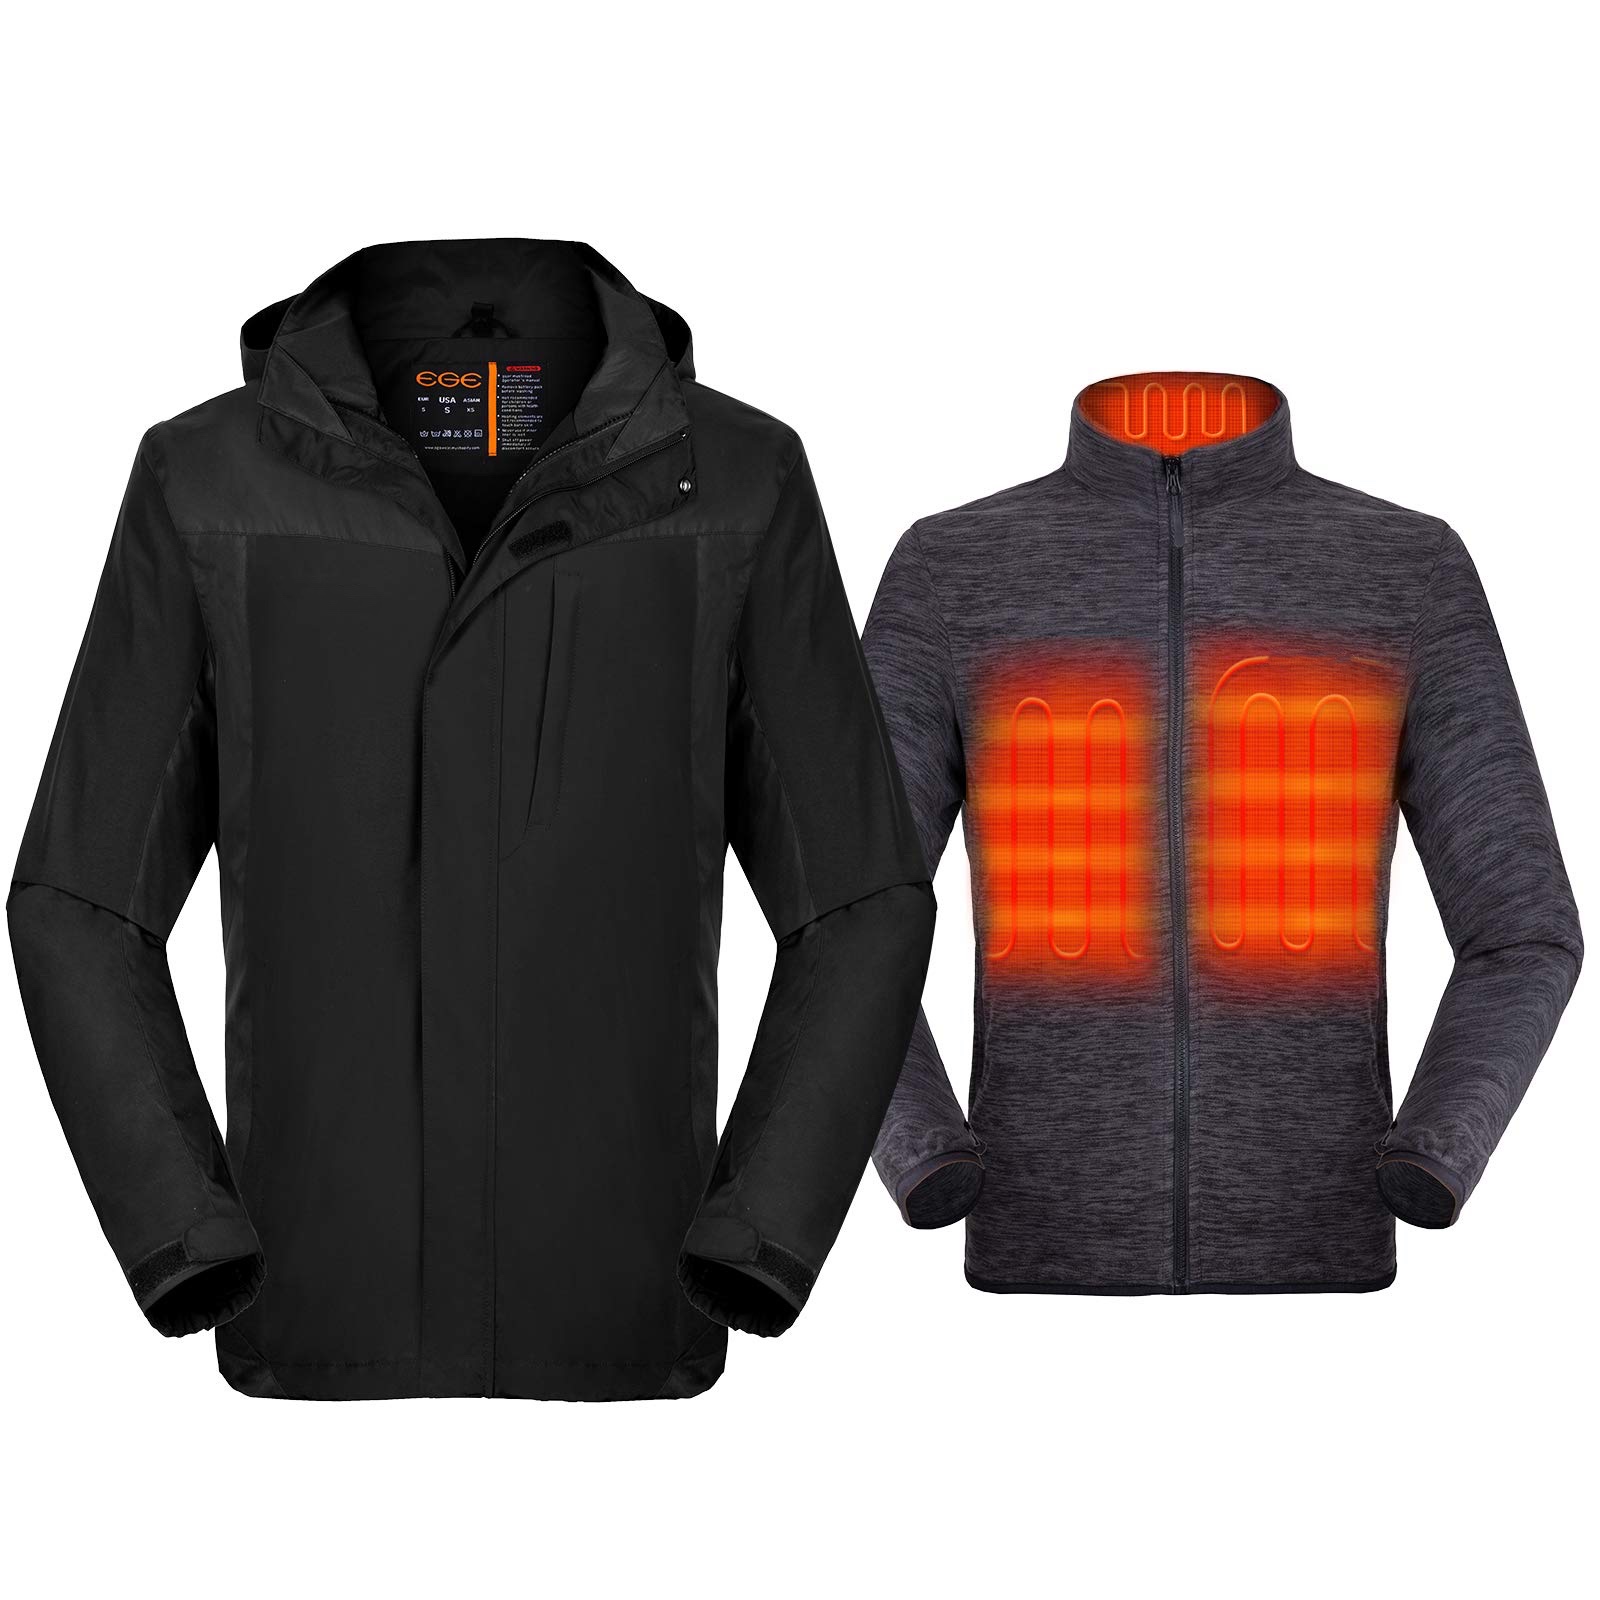 Men's 3-in-1 Heated Jacket with Battery Pack 5V